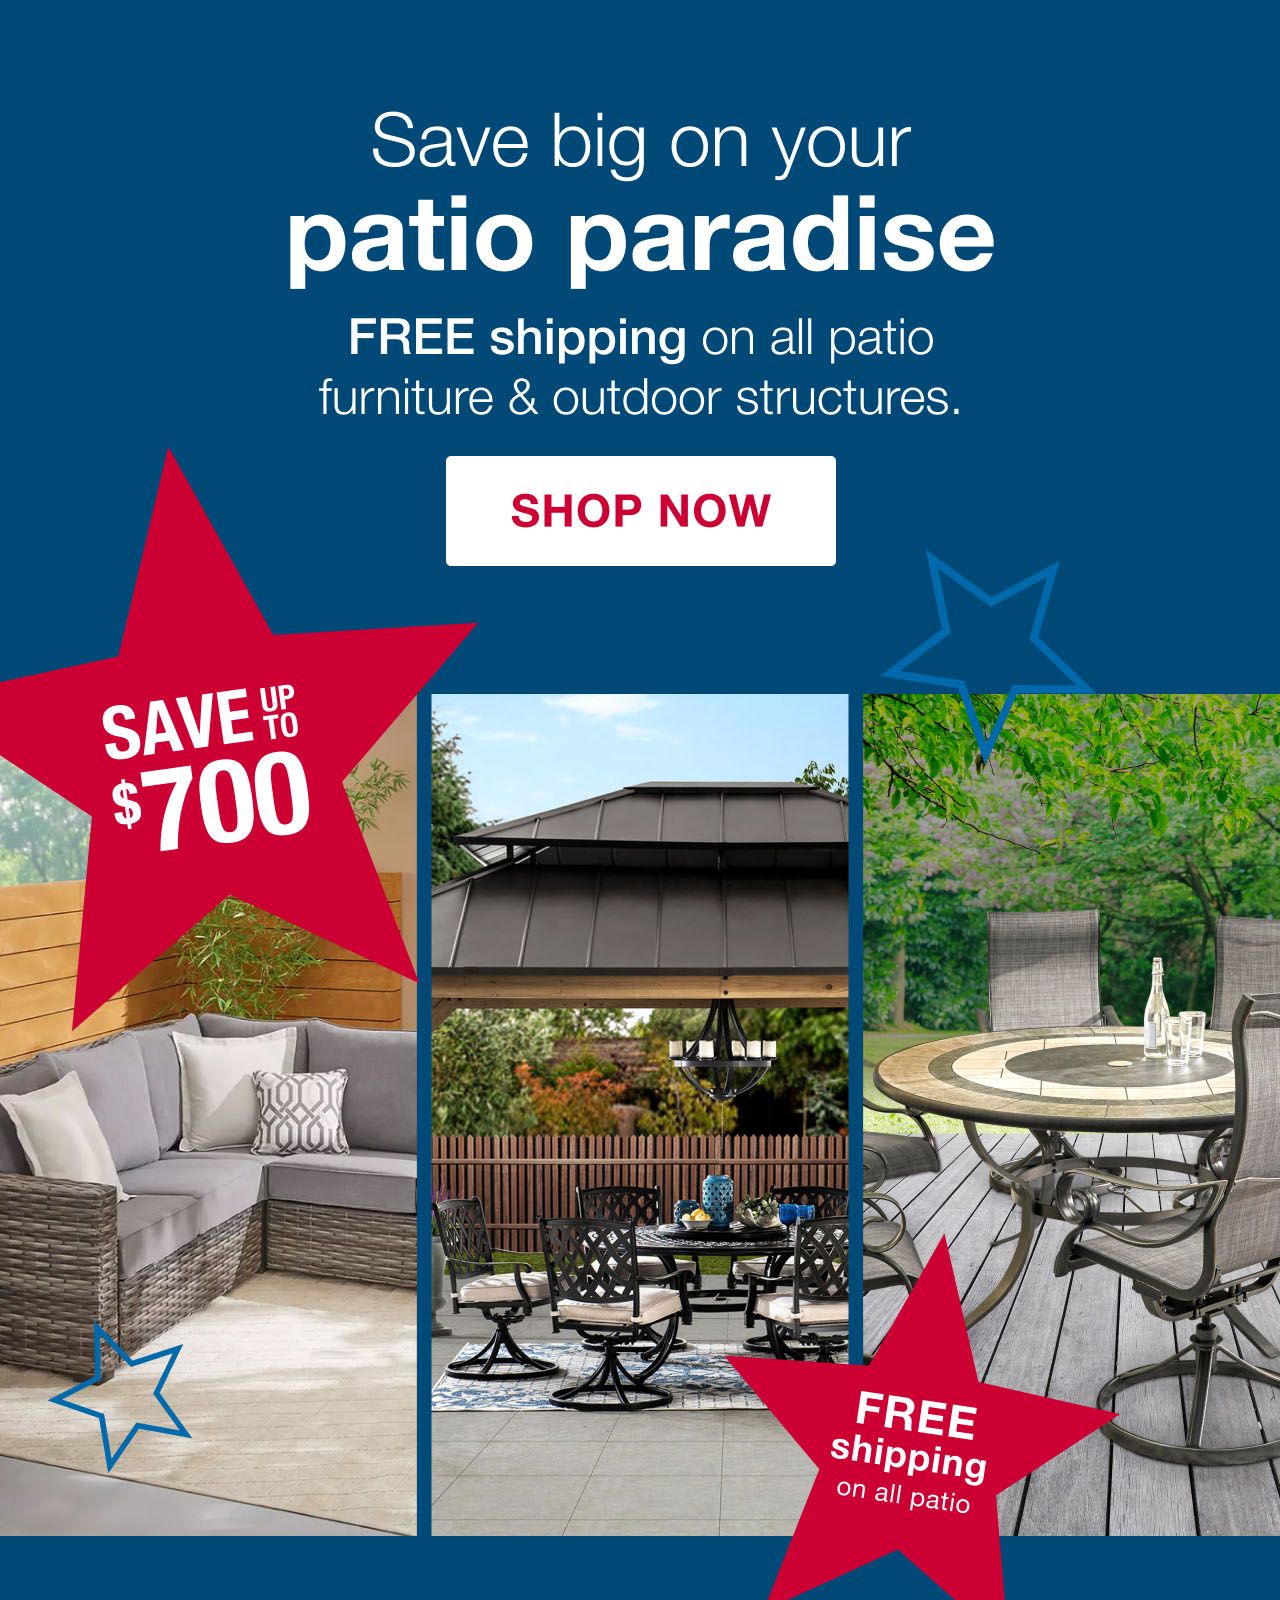 Save big on your patio paradise. Free shipping on all patio furniture and outdoor structures. Click to shop now